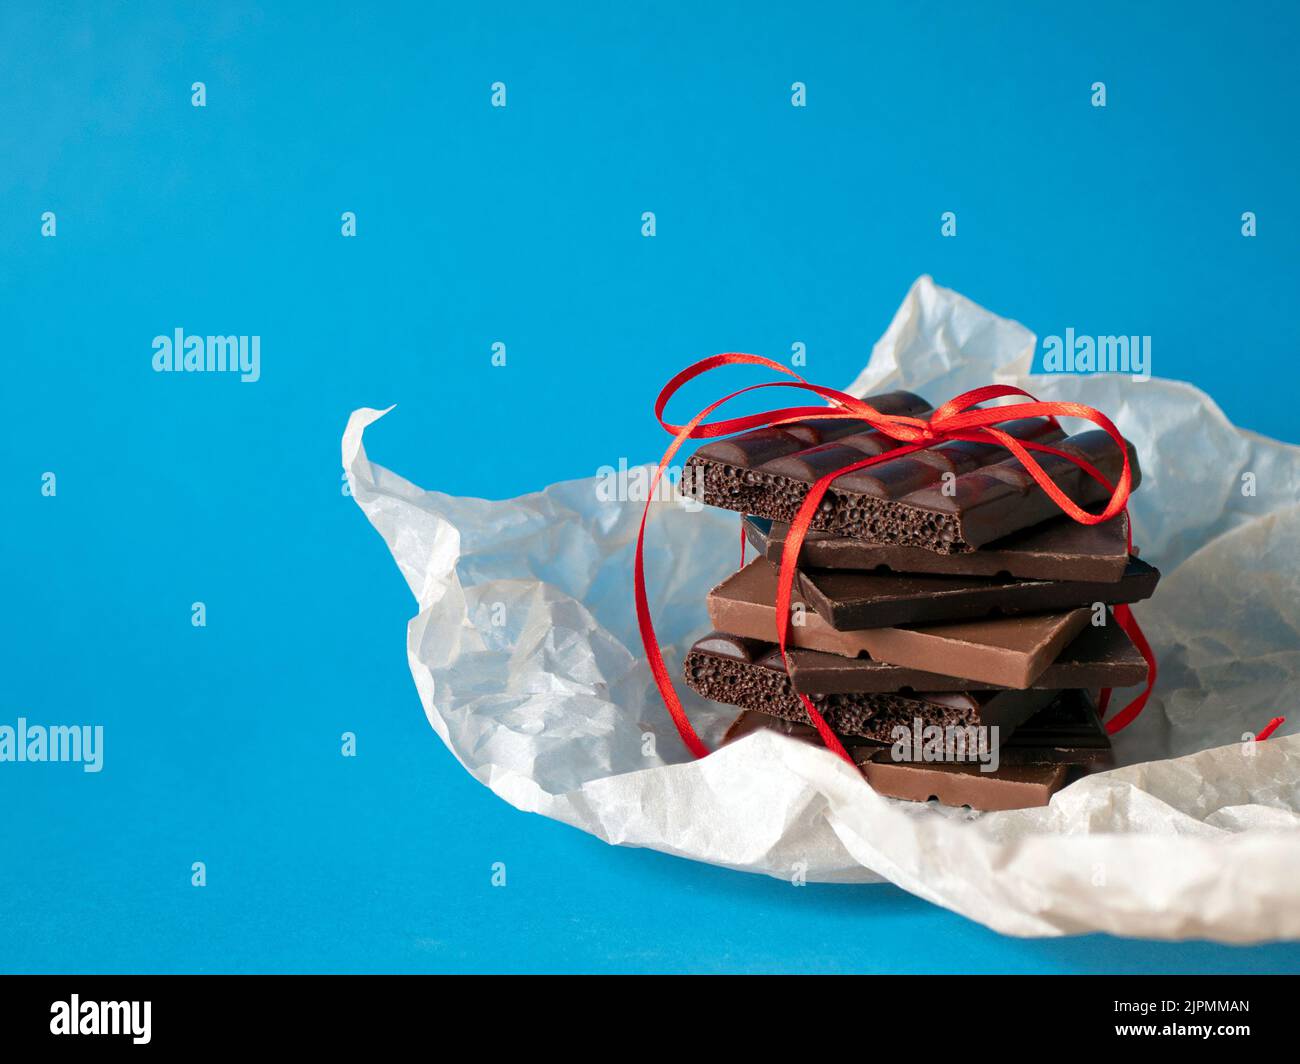 Chocolate stack wrapped up with a red ribbon on blue background, copy space. Concept of sweet present, pleasant gift Stock Photo